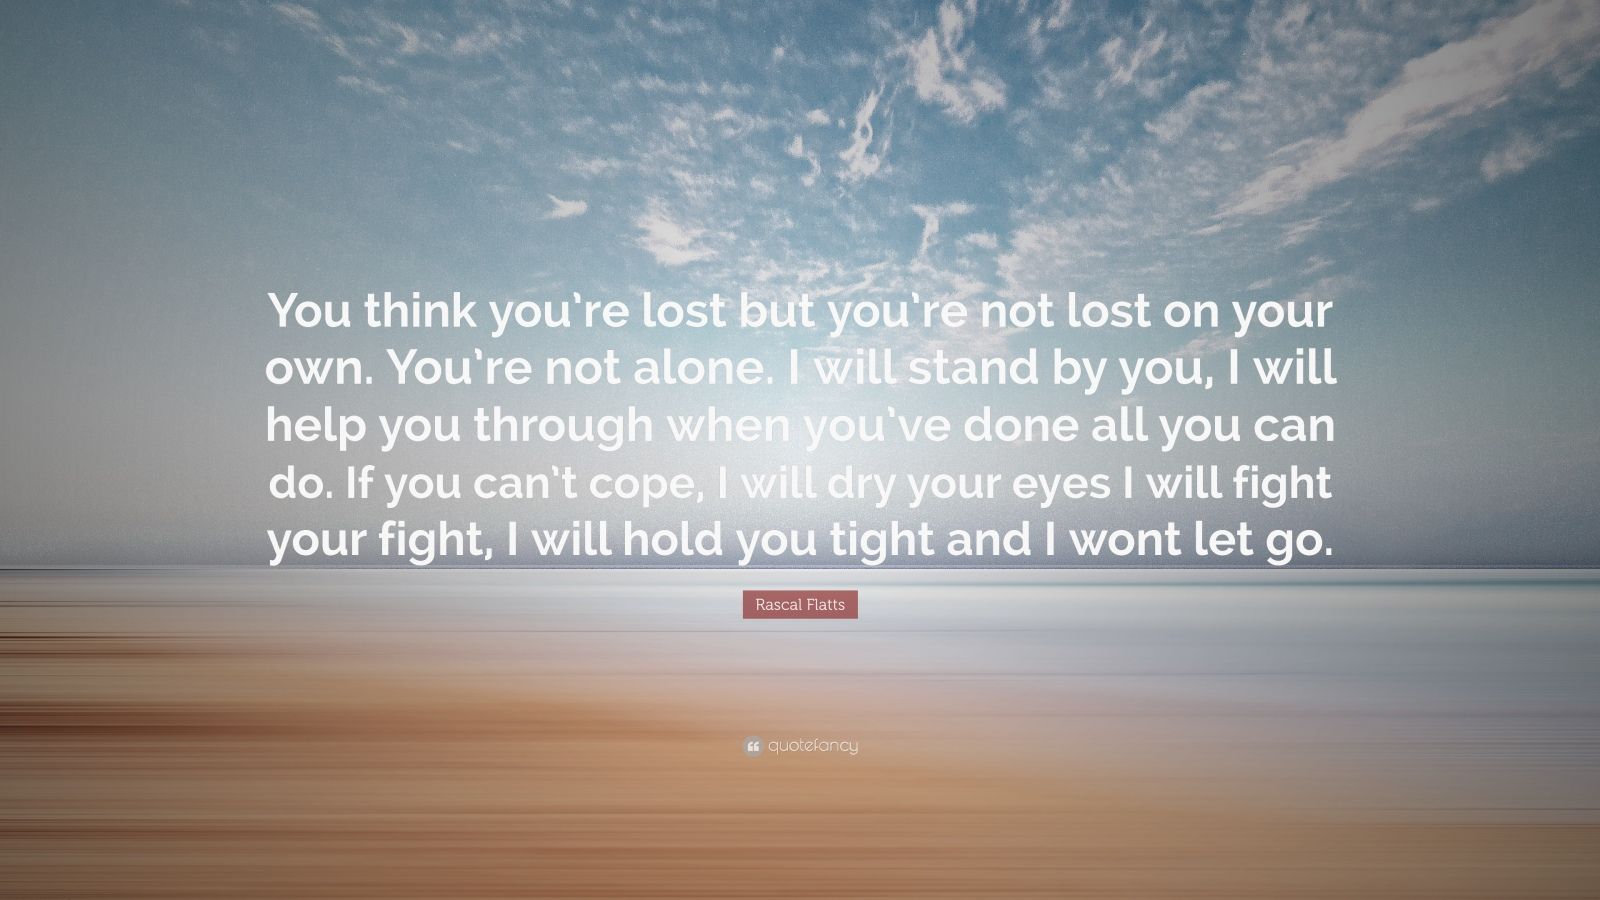 Rascal Flatts Quote: “You think you’re lost but you’re not lost on your